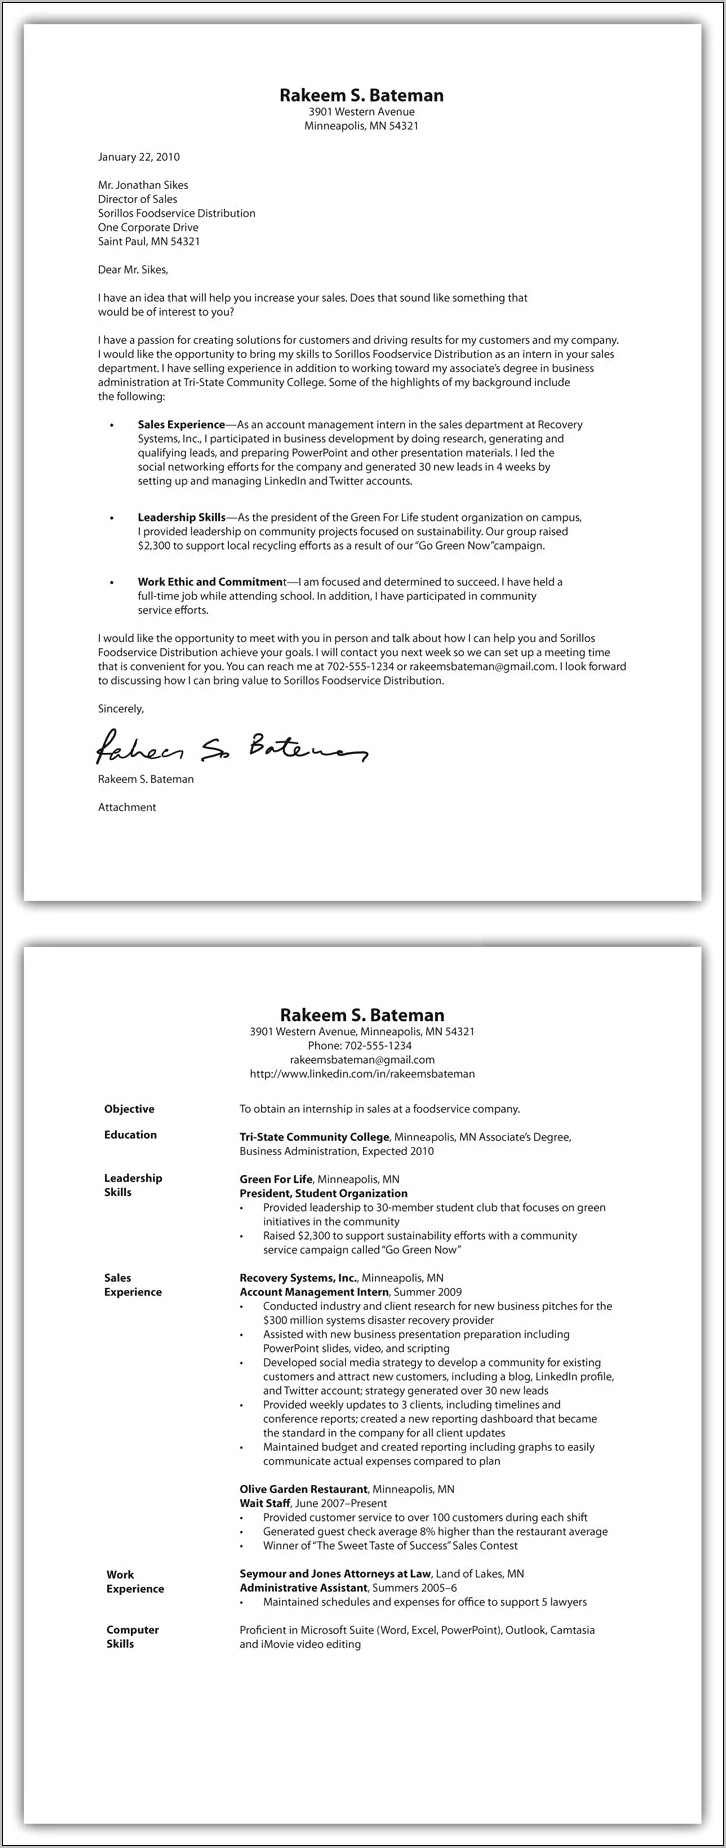 Cover Letter Same Paper As Resume